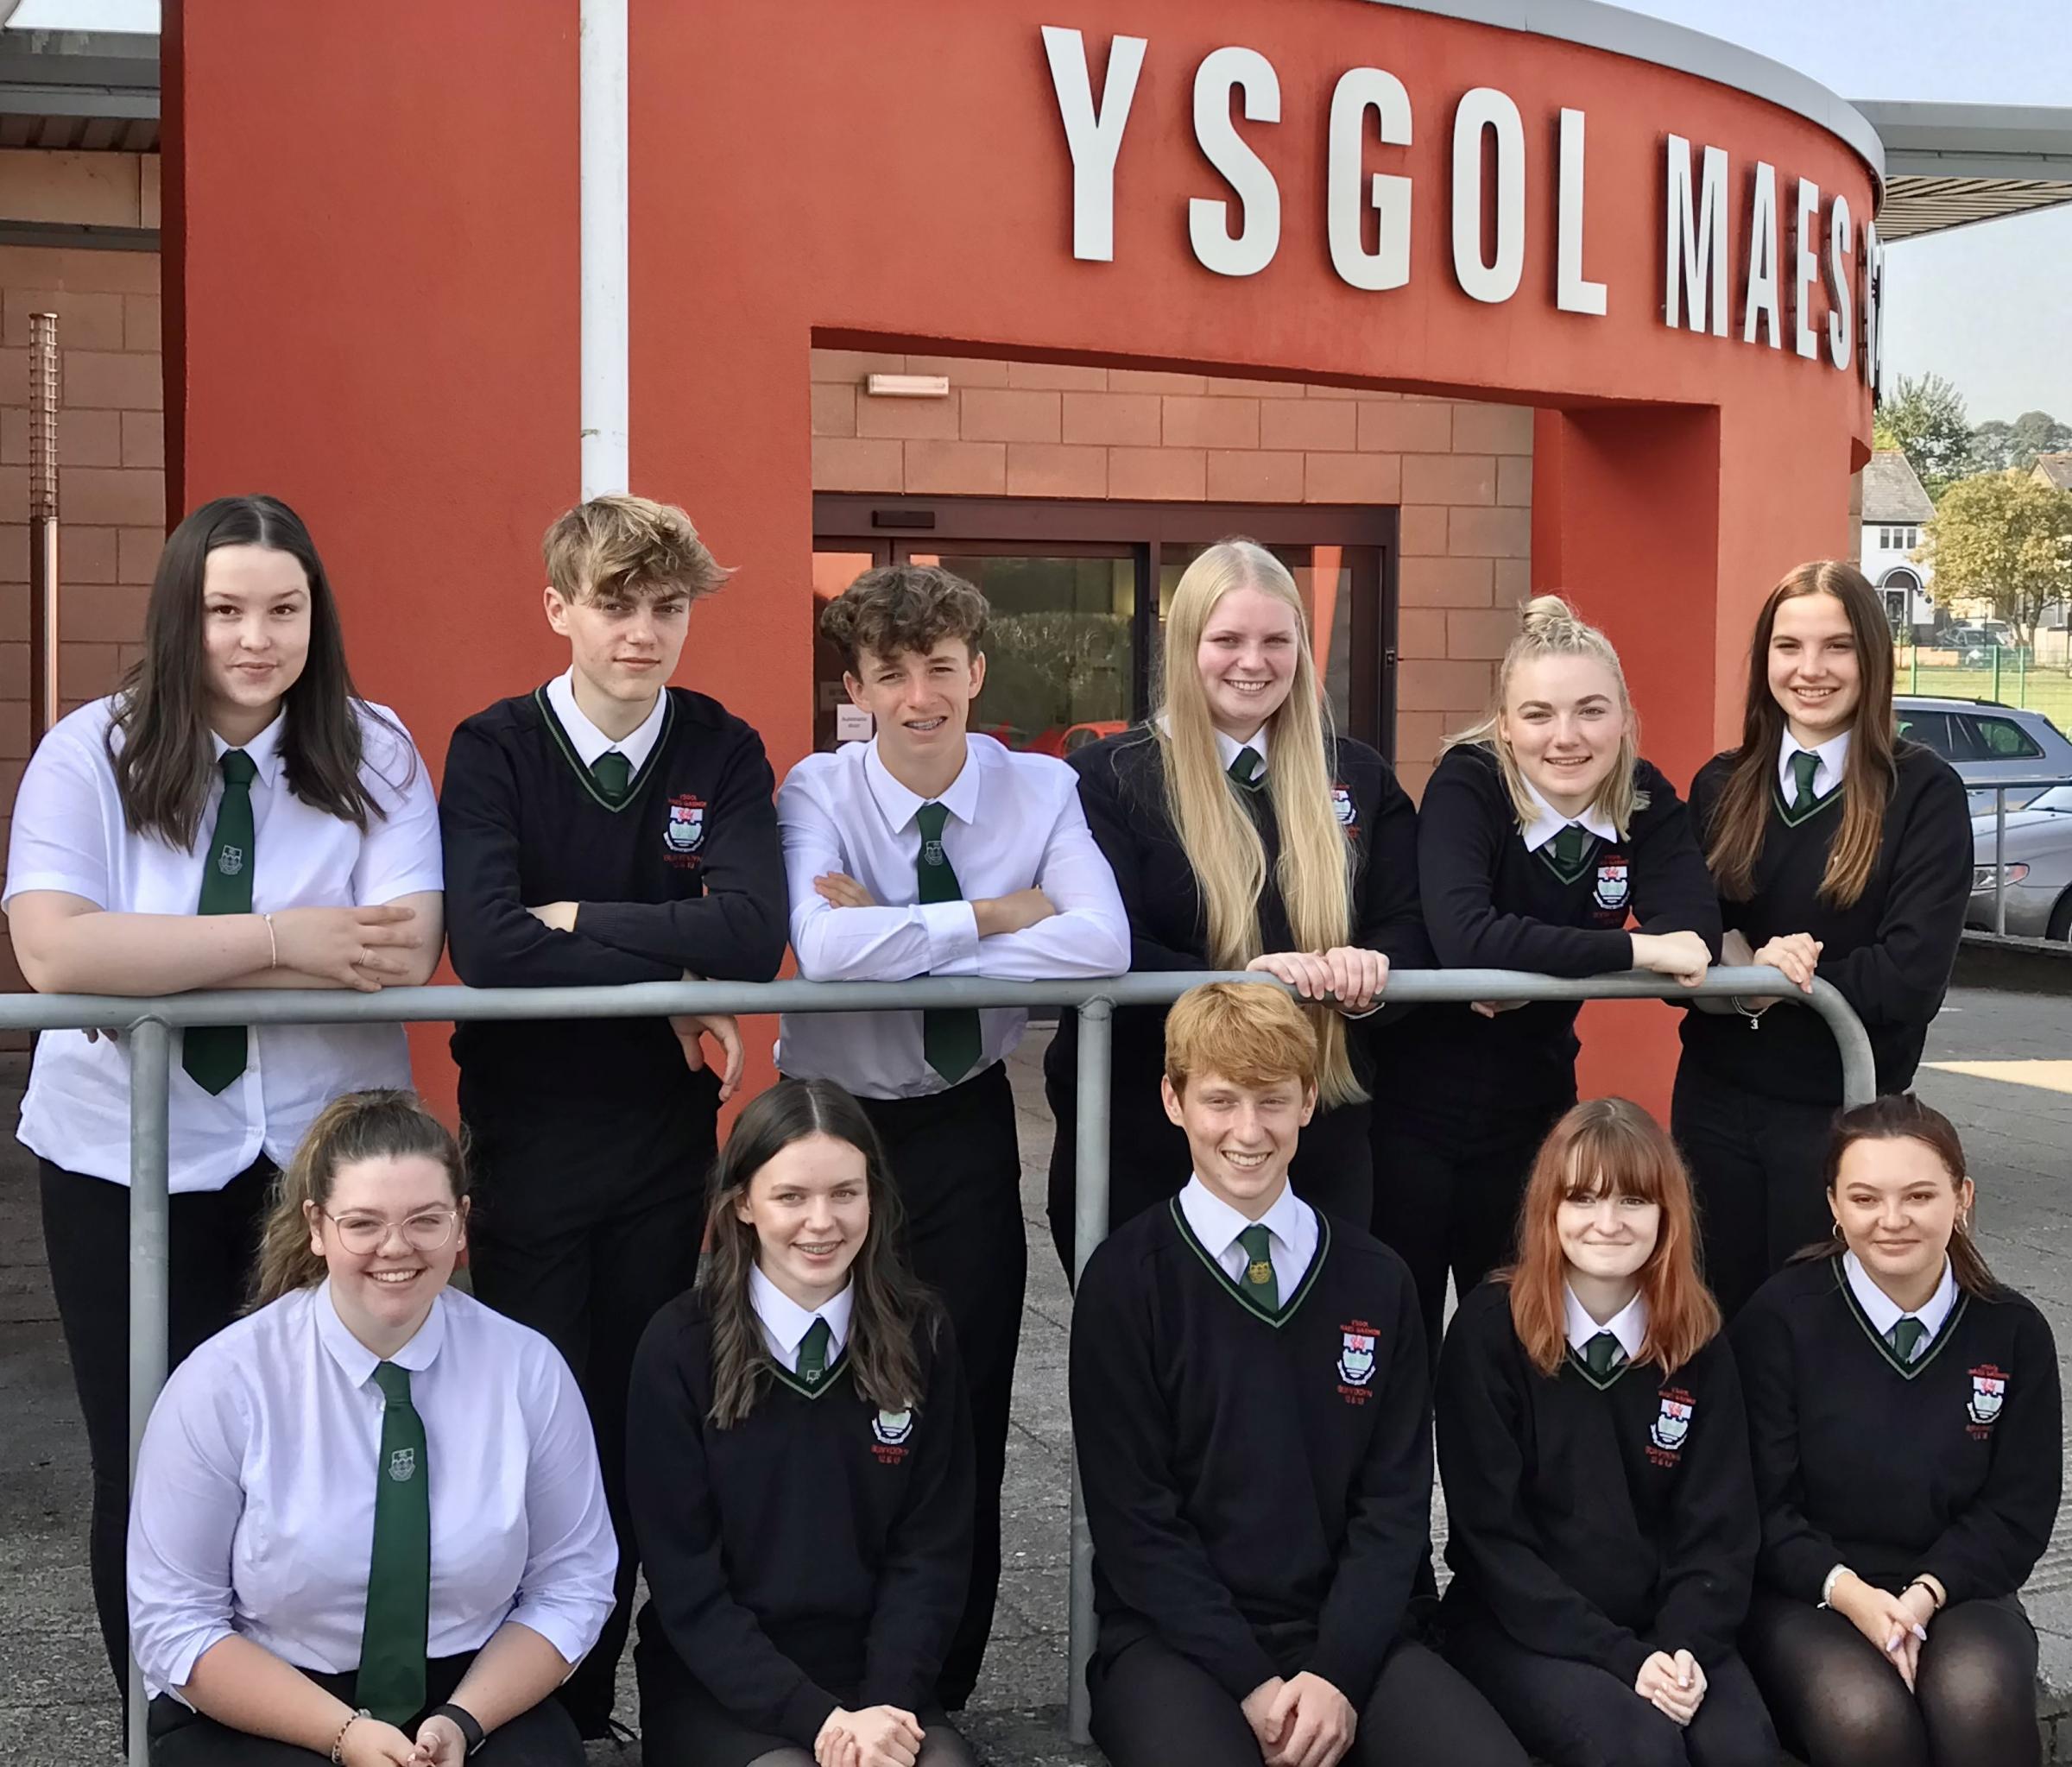 Ysgol Maes Garmon head pupils Cameron and Casi with members of Sixth Form forum - Lydia, Isobel, Henry, Sion, Elen, Catrin, Honey, Eleanor and Caitlin.